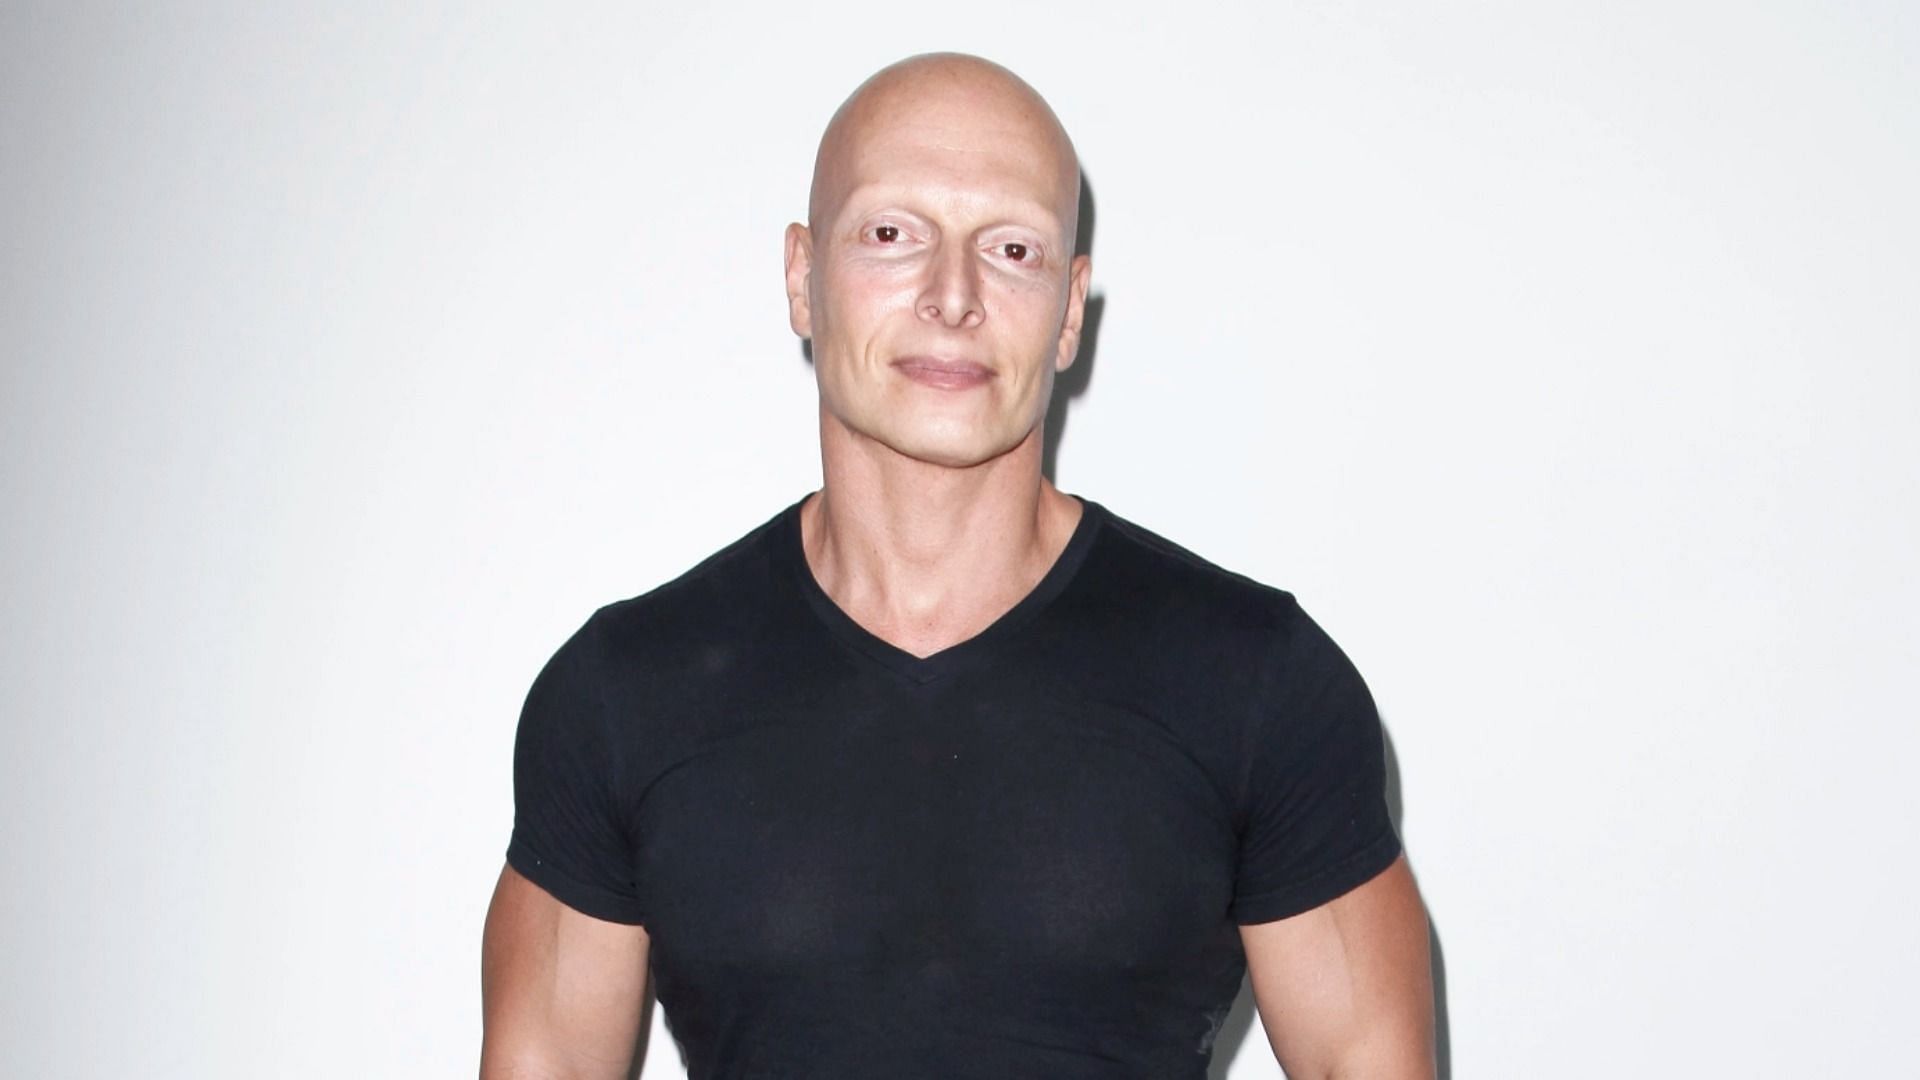 Joseph Gatt addressed the allegations against him on Twitter after his bail (Image via Tibrina Hobson/Getty Images)